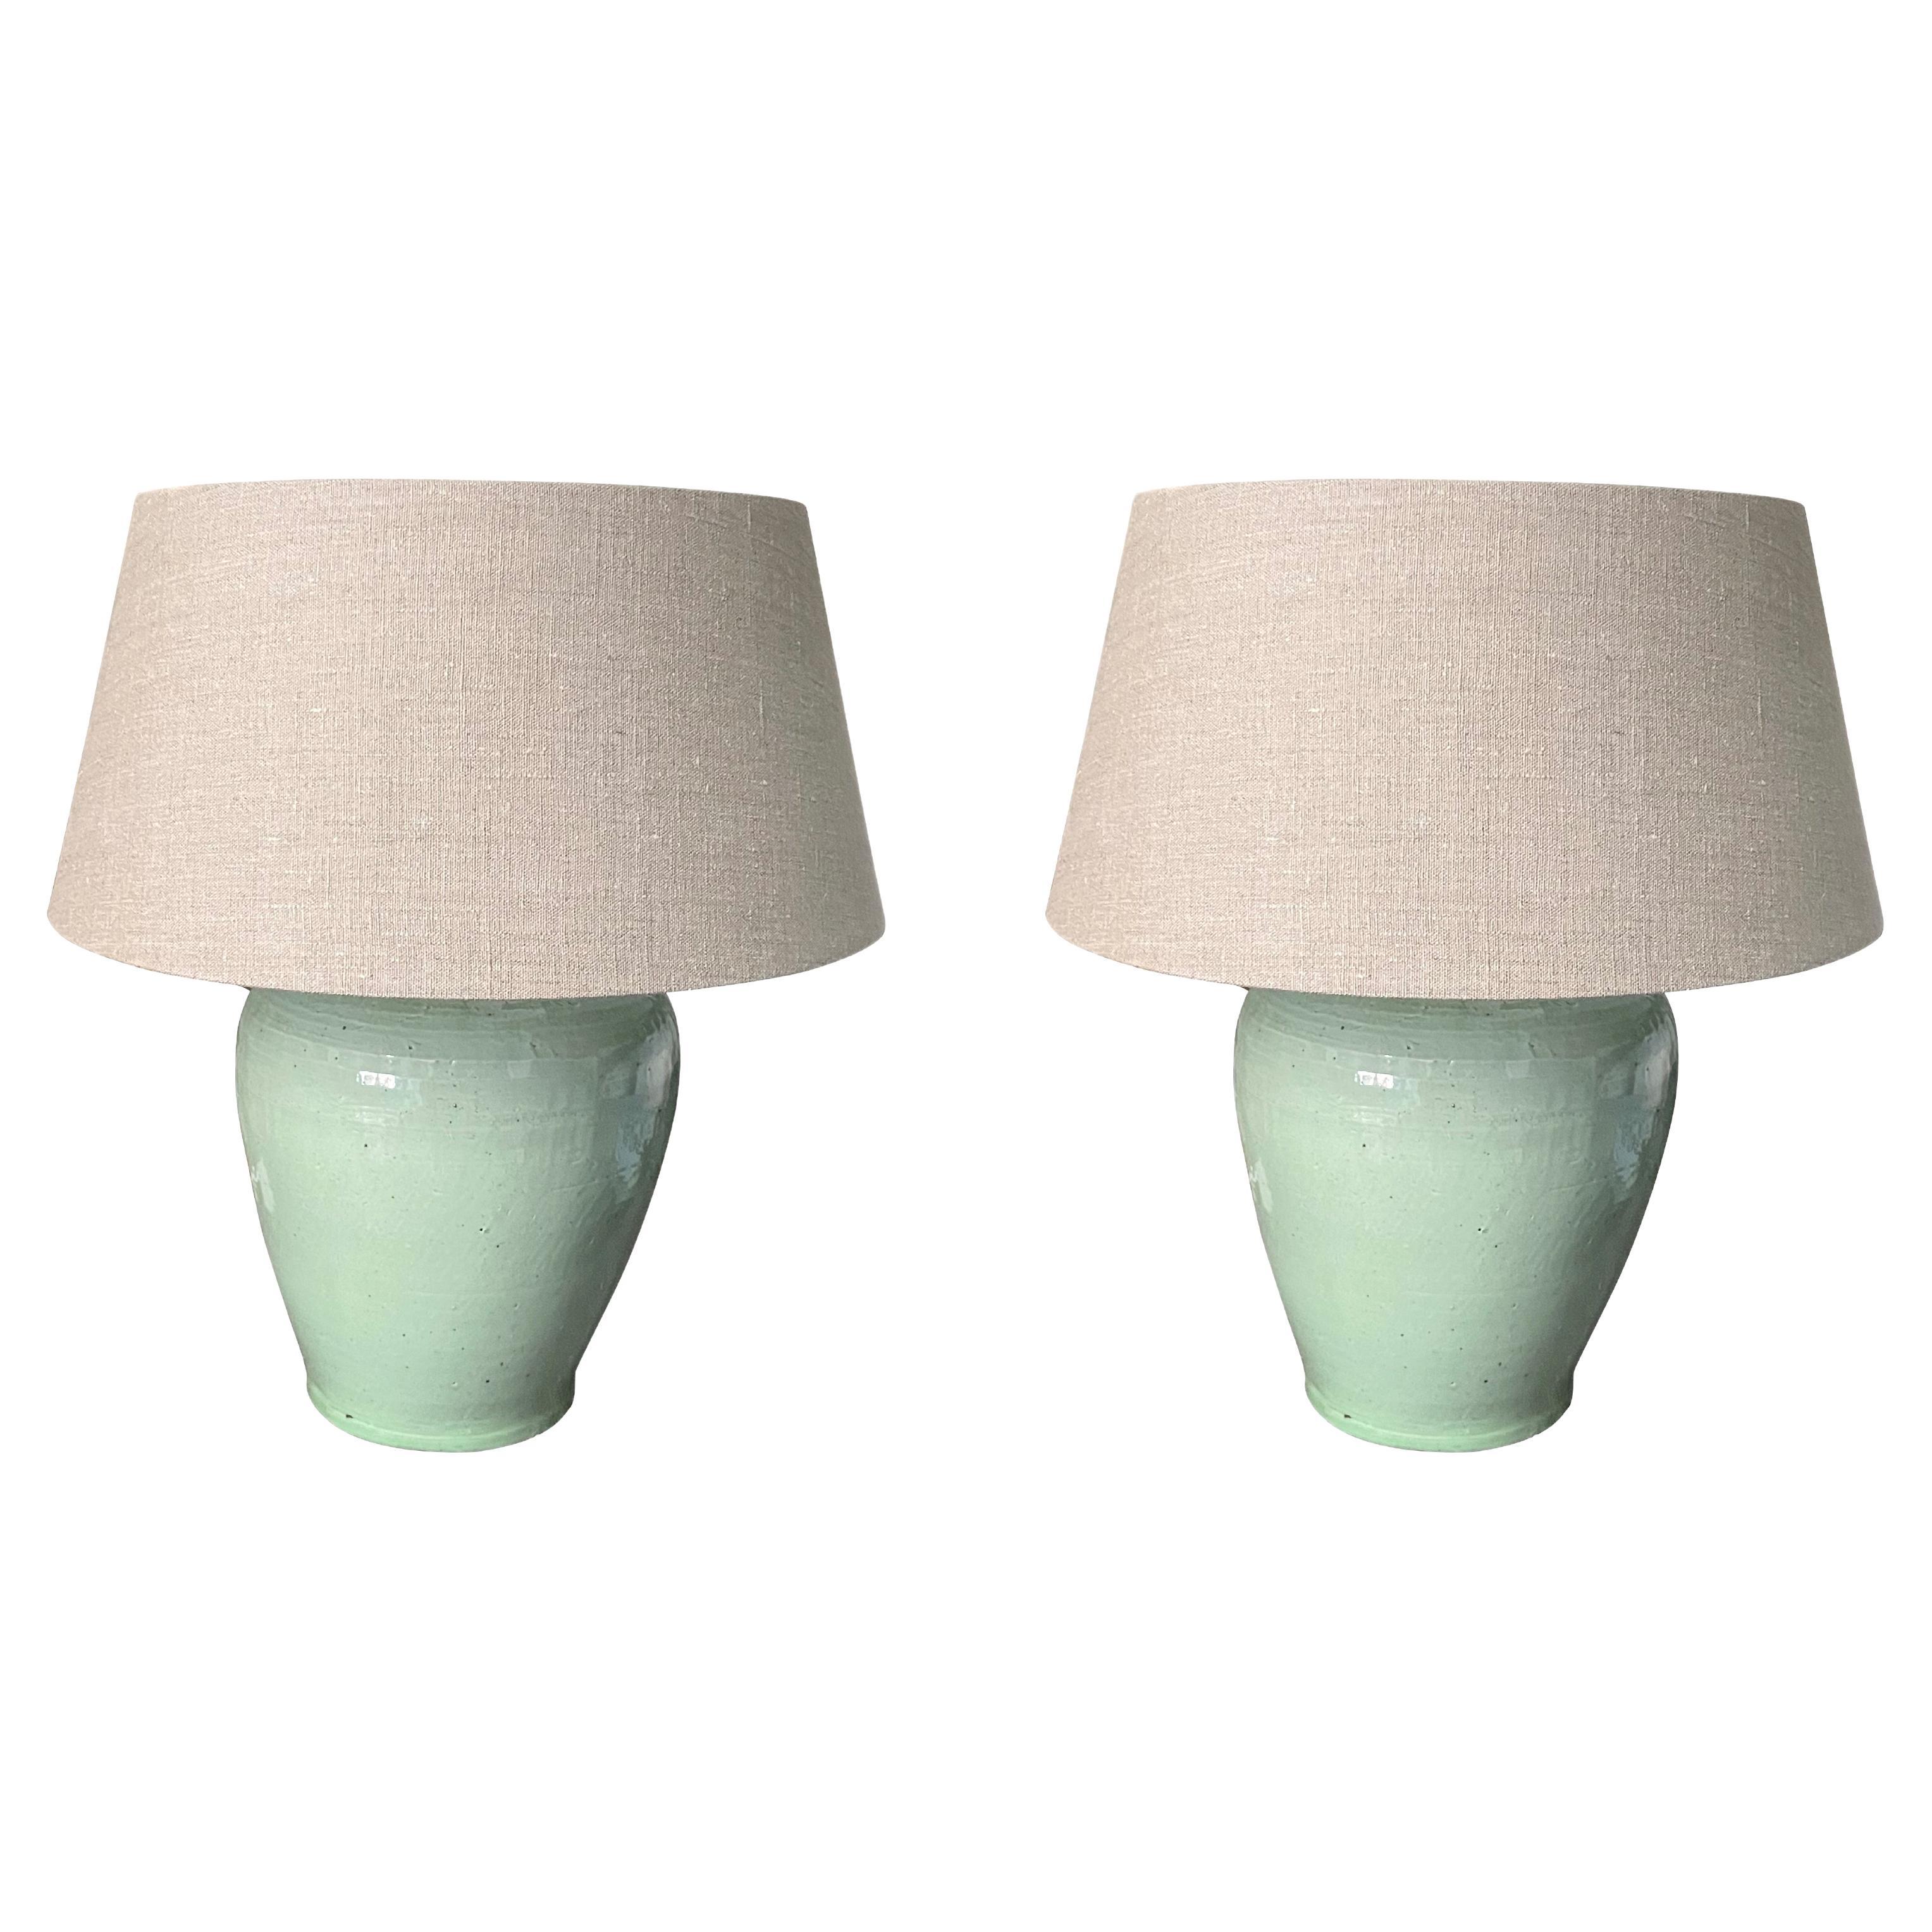 Pale Celadon Pair of Ceramic Lamps, China, Contemporary For Sale